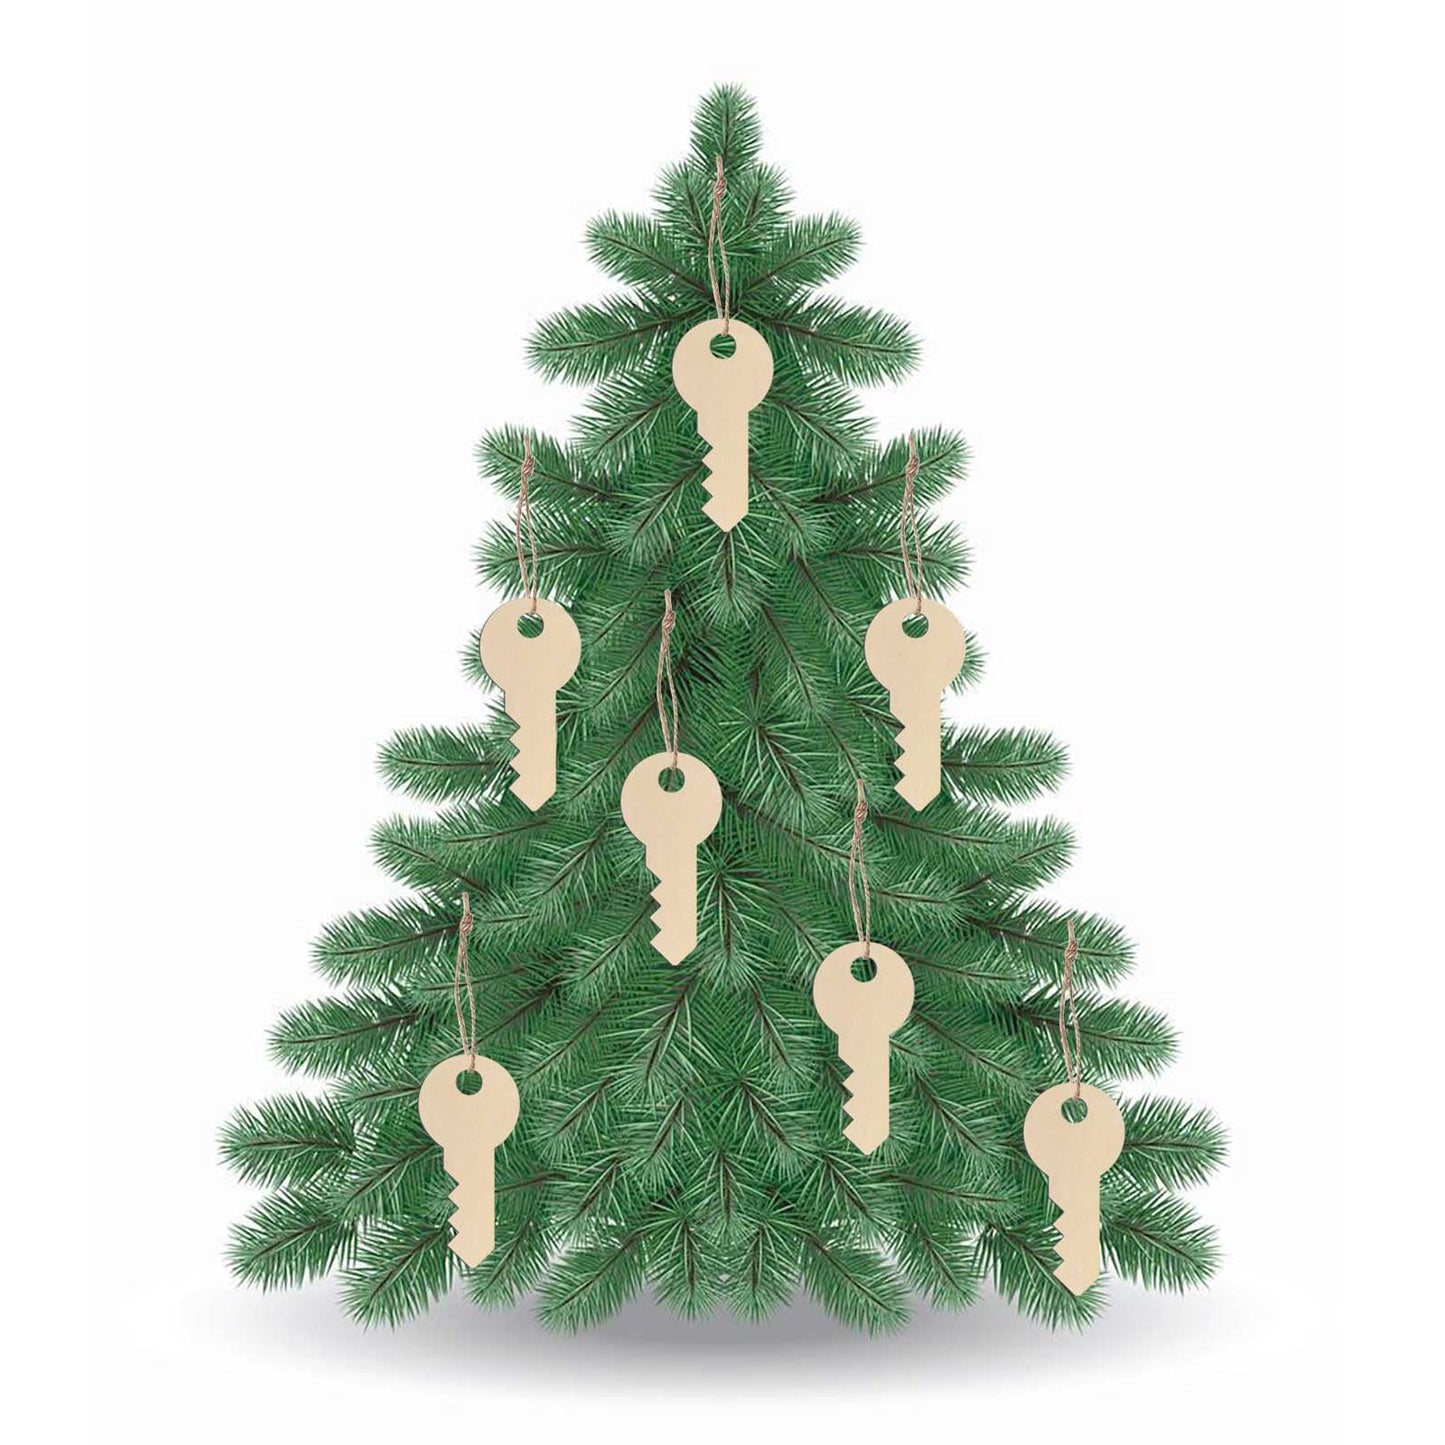 Creaides 20pcs Key Wood Crafts Cutouts Blank Wooden Key Shaped Hanging Ornaments Gift Tags Perfect for Wedding Birthday Christmas Party Home